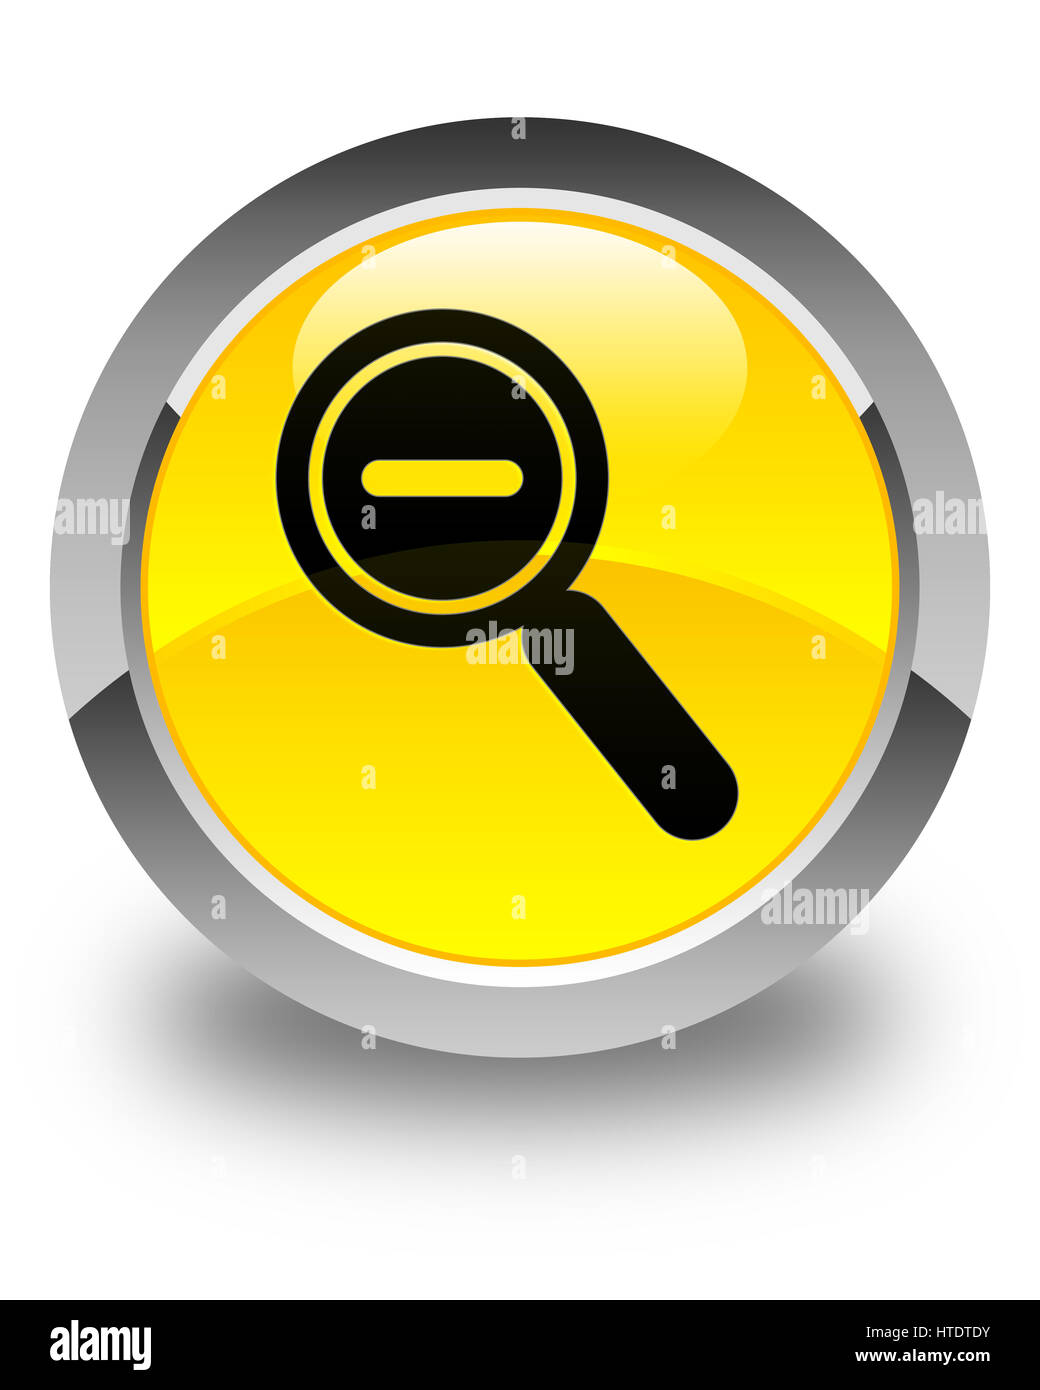 Zoom out icon isolated on glossy yellow round button abstract illustration Stock Photo